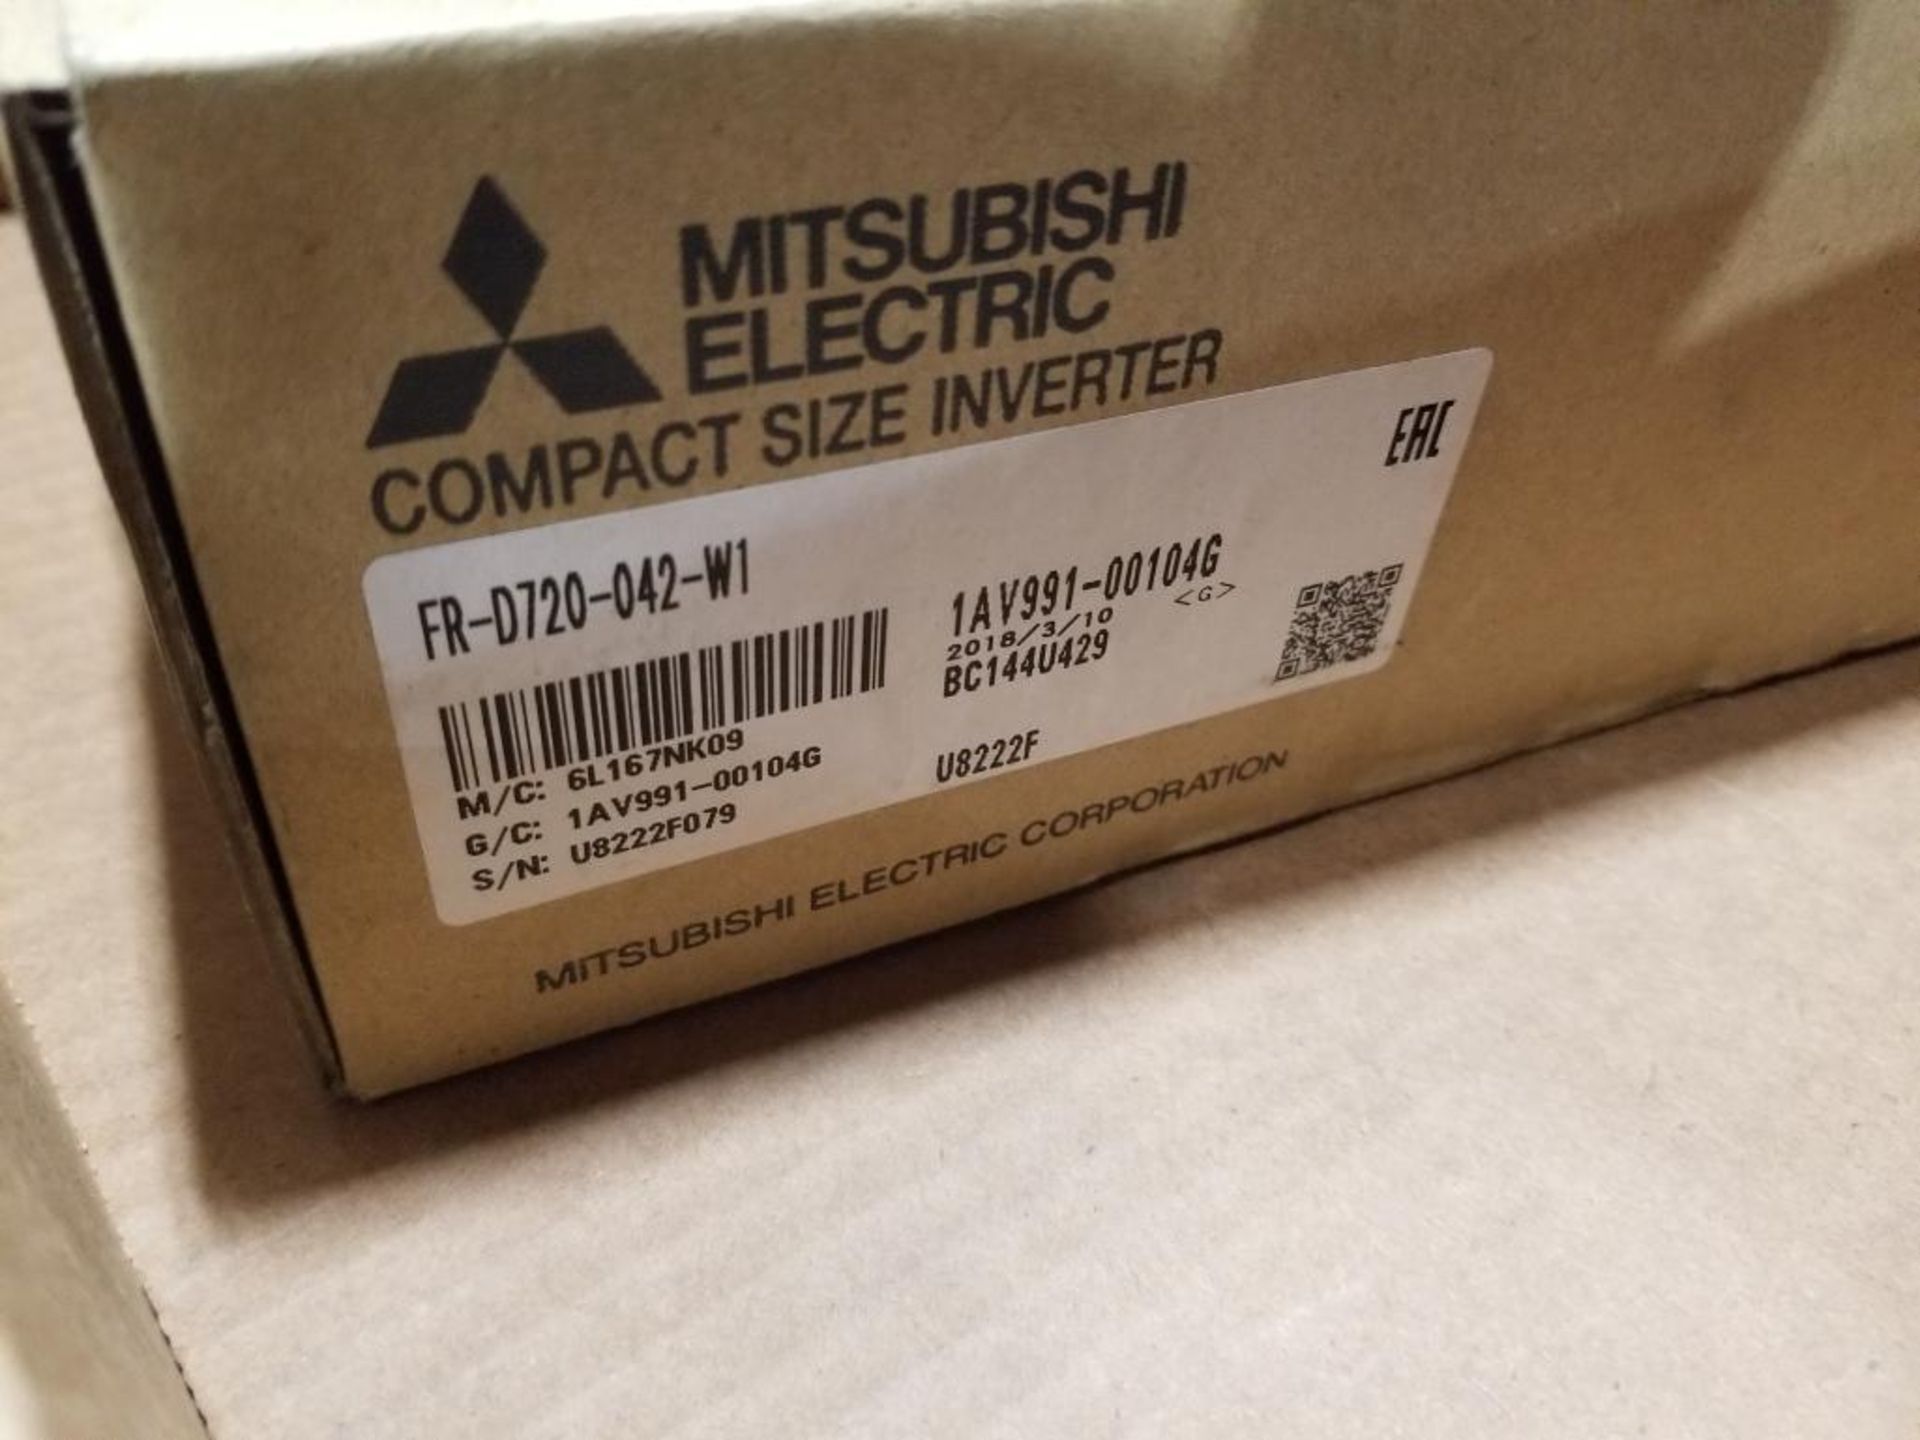 MItsubishi compact size inverter. Part number FR-D720-042-W1. - Image 5 of 5